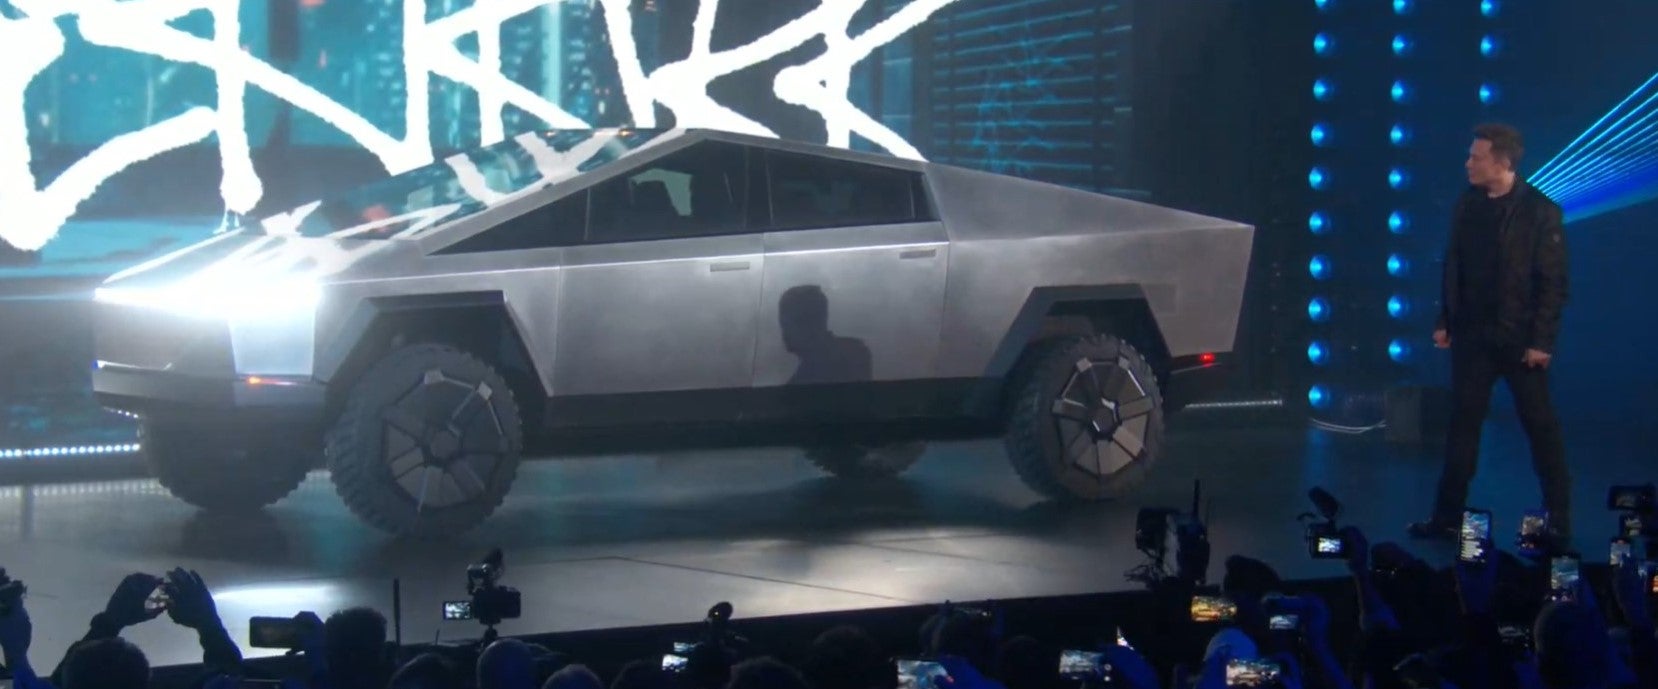 Elon Musk unveiled the Tesla Cybertruck at an event in California